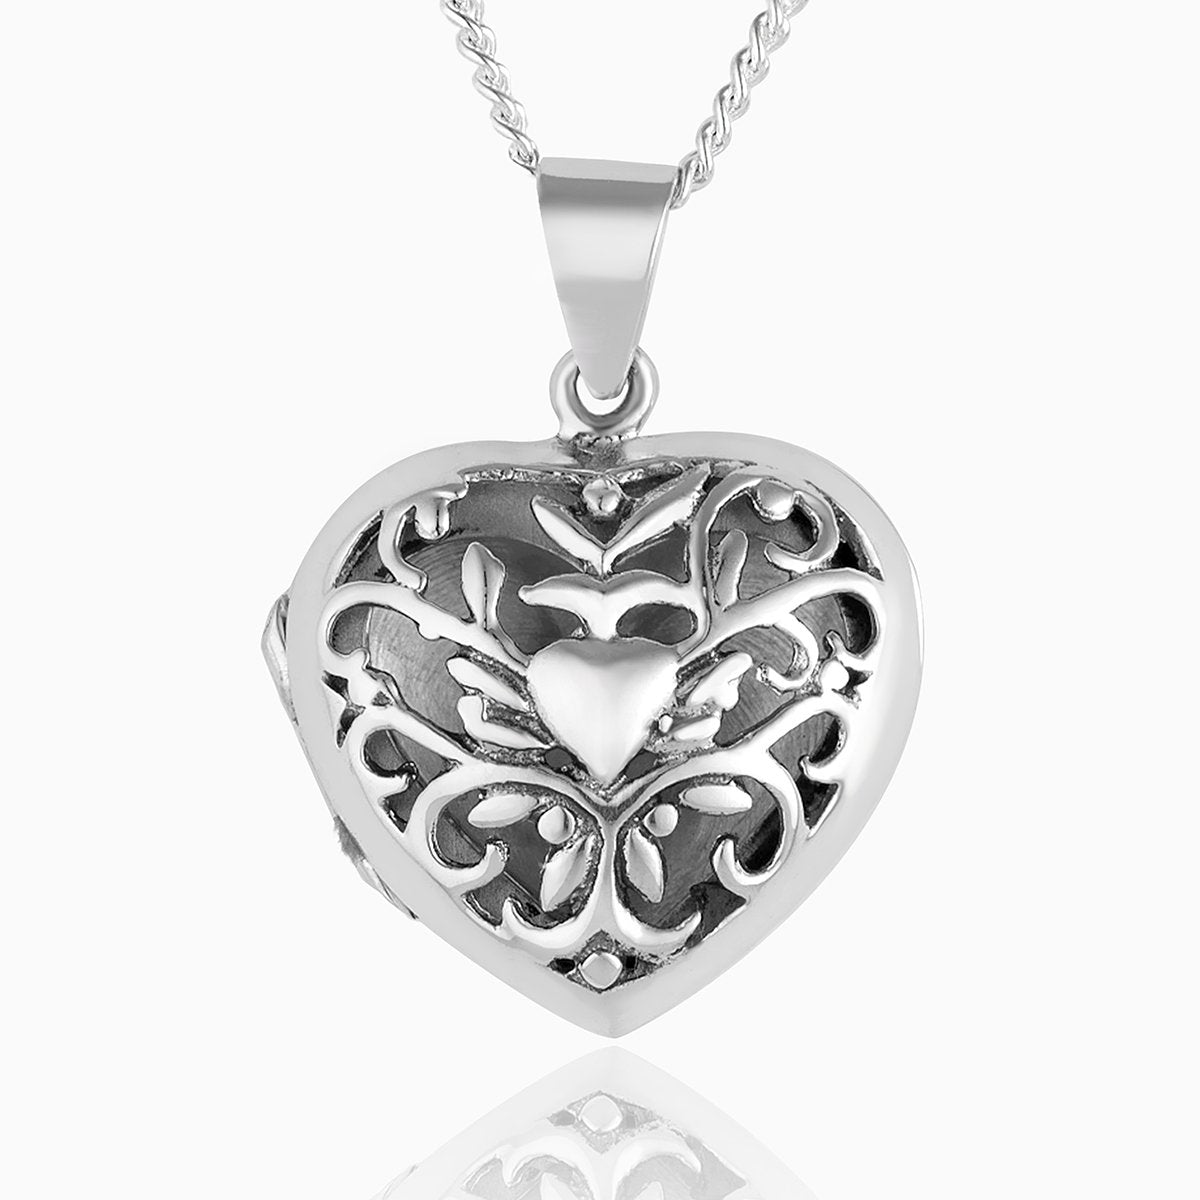 This is a front shot of a 925 sterling silver filigree heart locket.